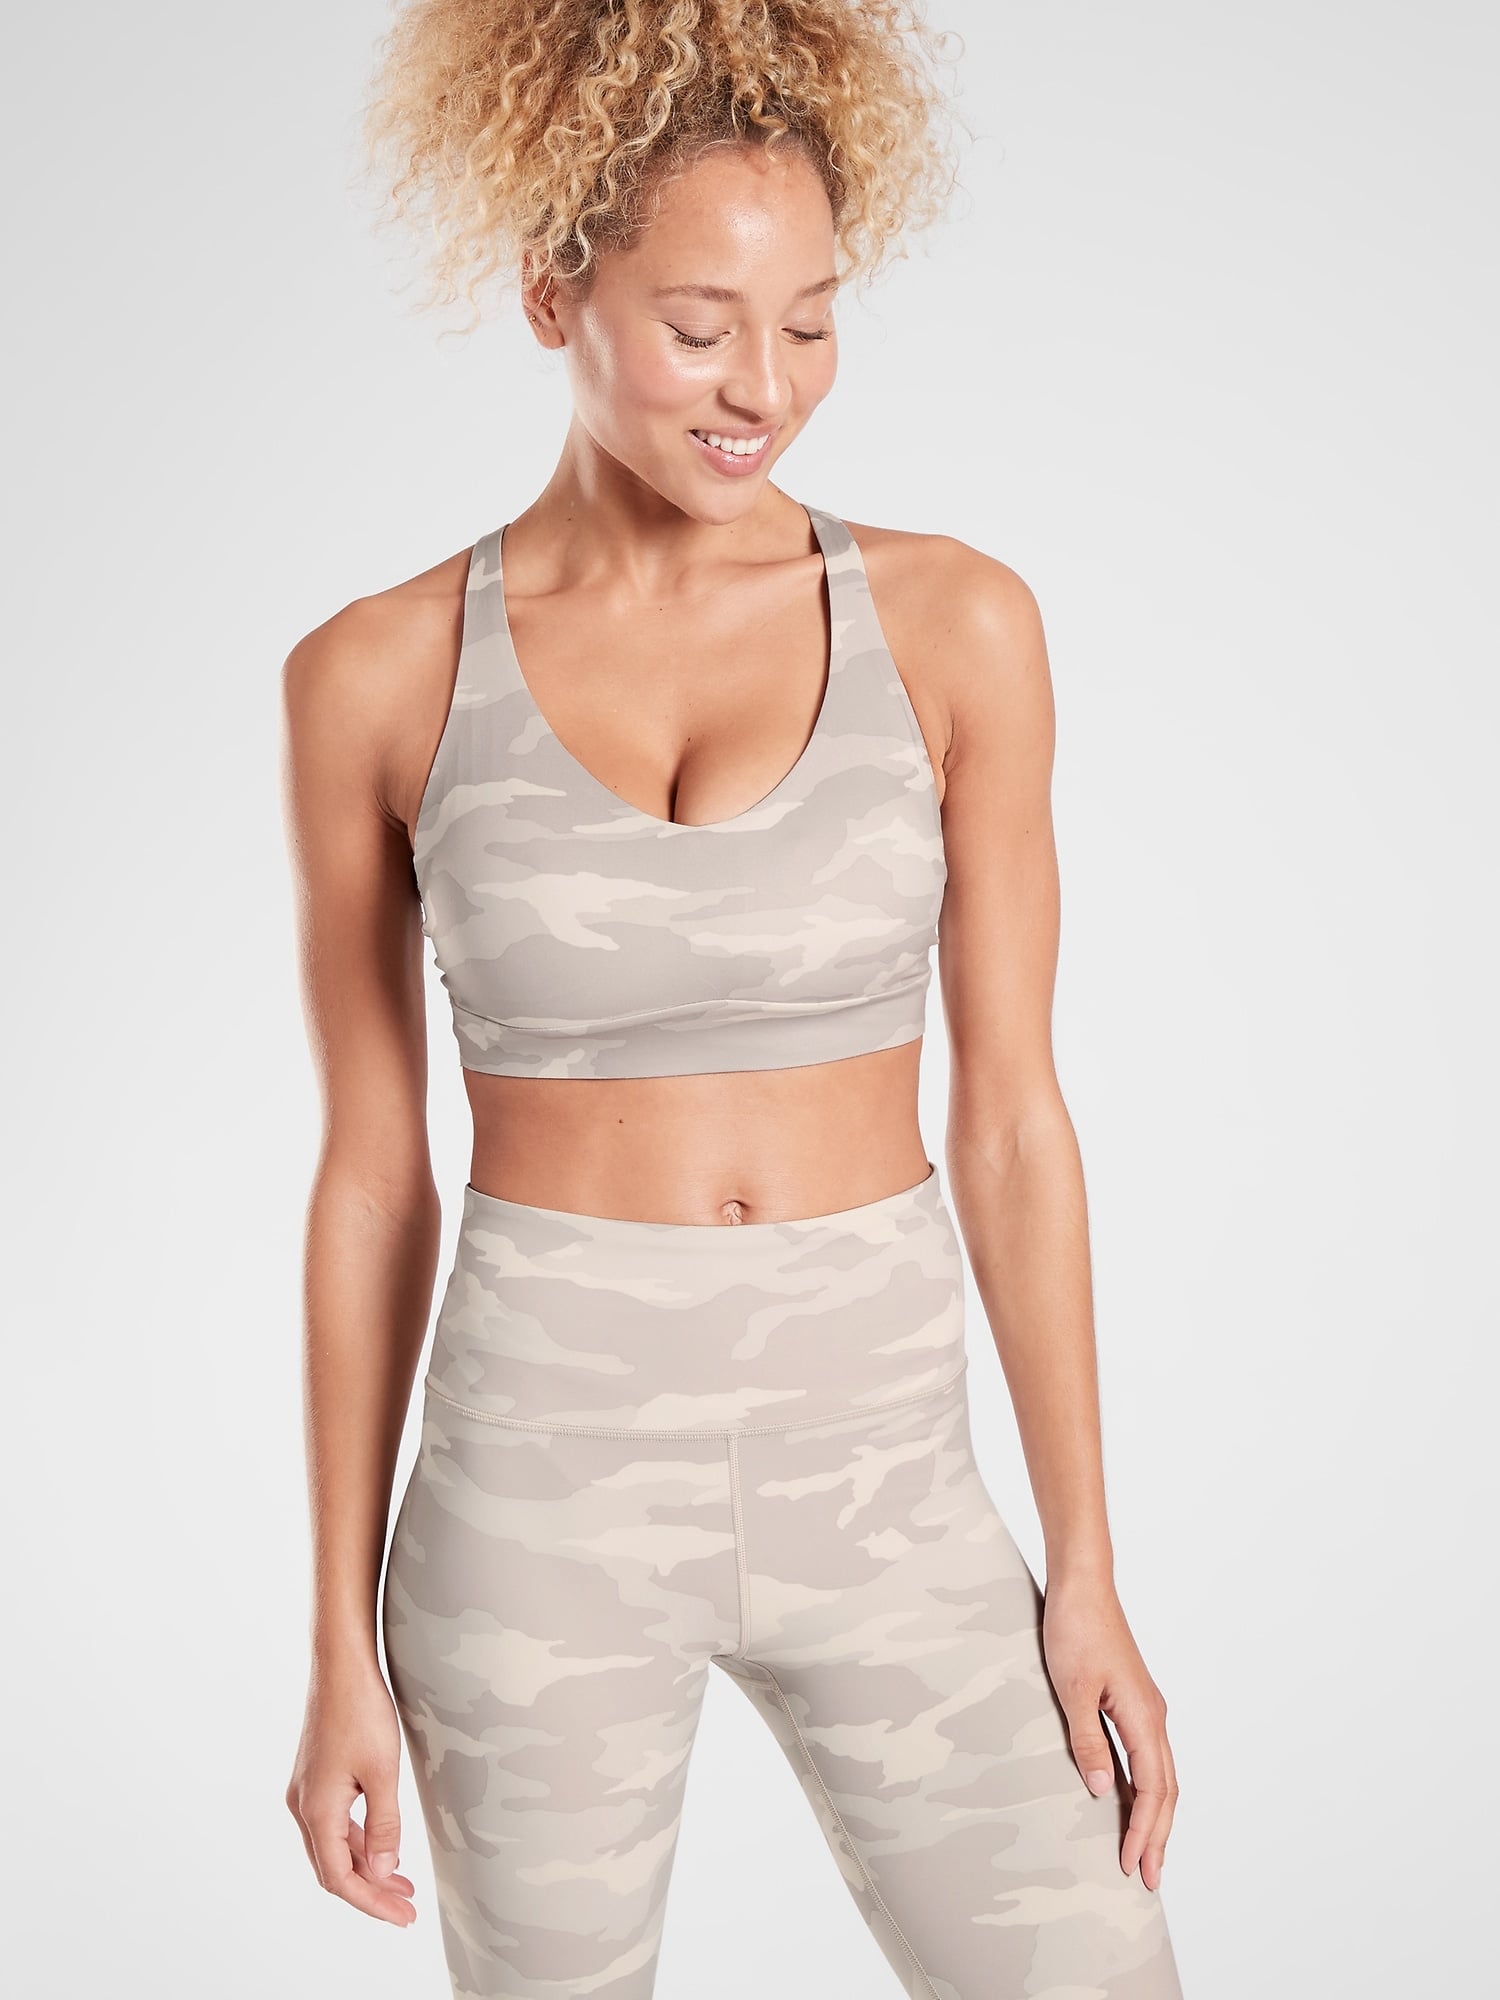 Athleta Solace Printed Bra D-DD, Gym Class Hero! This Brand Has the Best  Mother-Daughter Fitness Sets